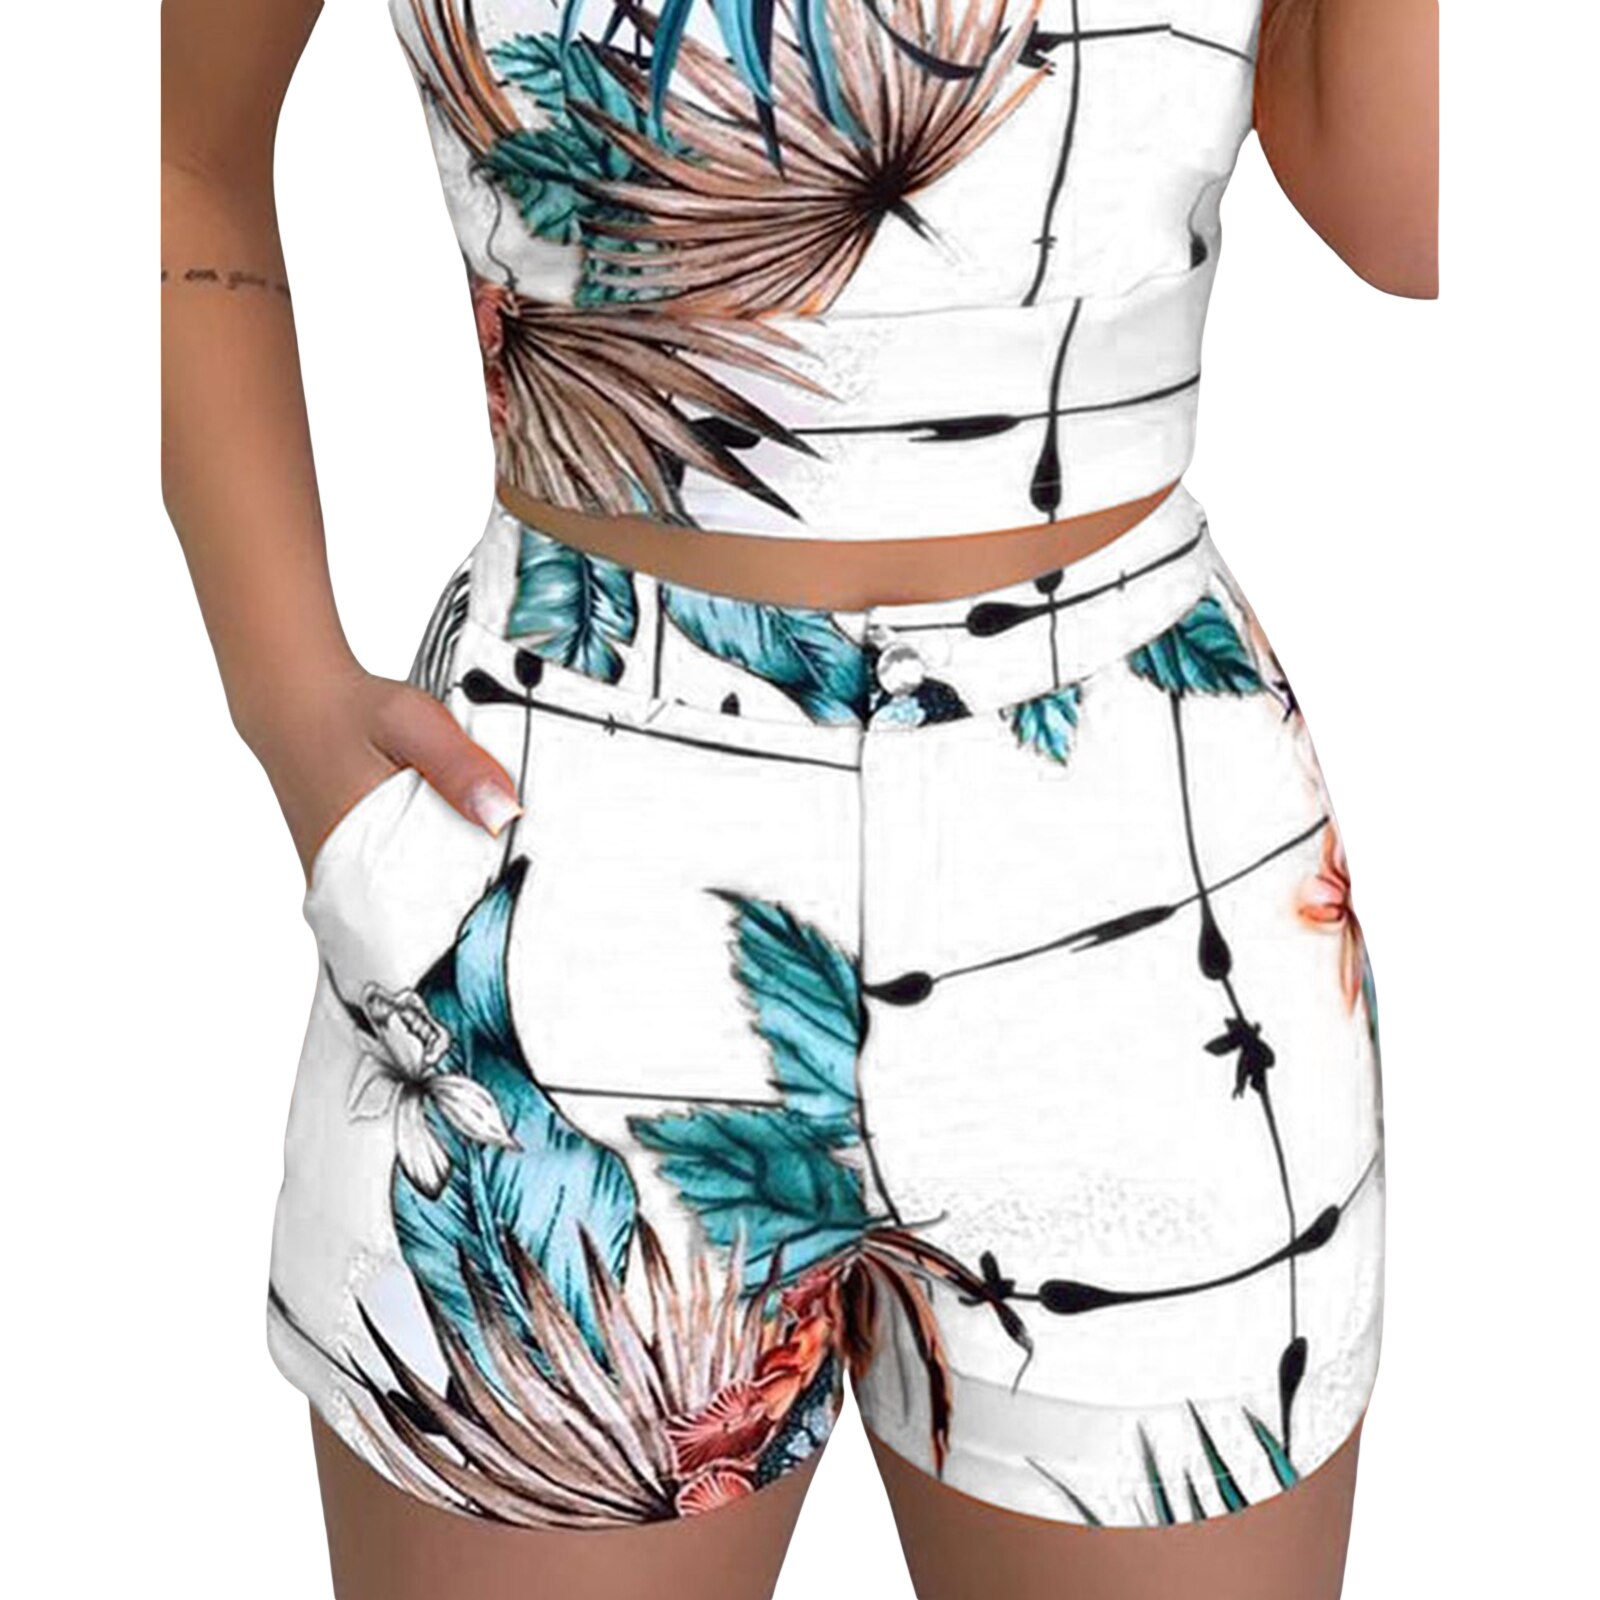 Summer-Womens-2-pieces-Clothes-Set-Sleeveless-Print-Top-and-Shorts-Outfit-for-Ladies-Fashion-Women-4